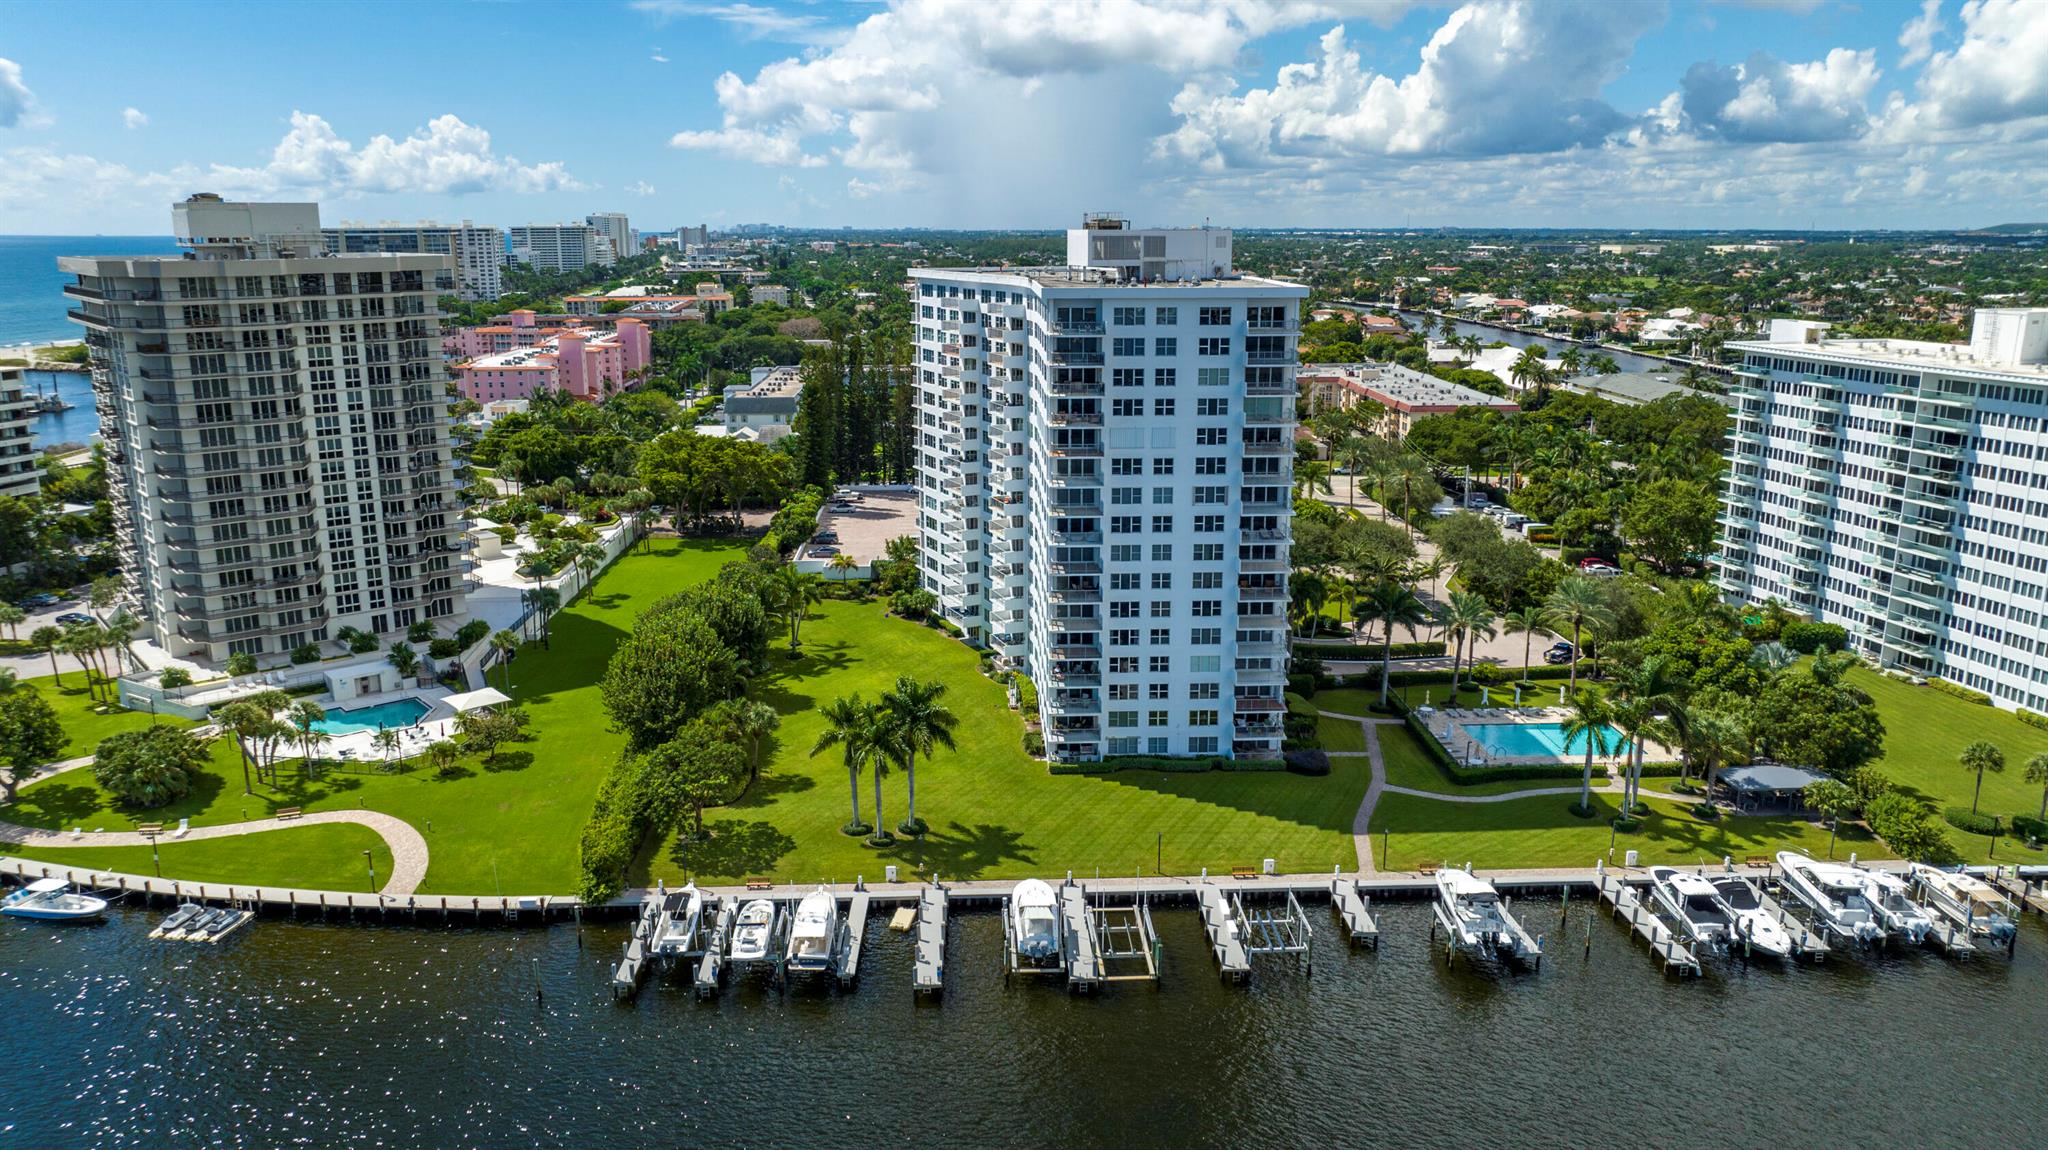 An exclusive boutique 17-story condominium, Lake House South stands majestically on the southern shore of Lake Boca Raton on the Intracoastal Waterway, where vistas sweep to the Atlantic Ocean and also overlook the city. Featuring a stunning lobby and club room attended by a 24-hour doorman, the Lake House South Condominium offers a high level of privacy with 122 residences. This desirable address is sought after for its effortless luxury lifestyle and prime location, next to the Four-Diamond Waterstone Resort & Marina, and near South Inlet Park's ocean beachfront as well as the world-famous resort, The Boca Raton, with Mizner Park's fine shopping and dining just a couple miles away.